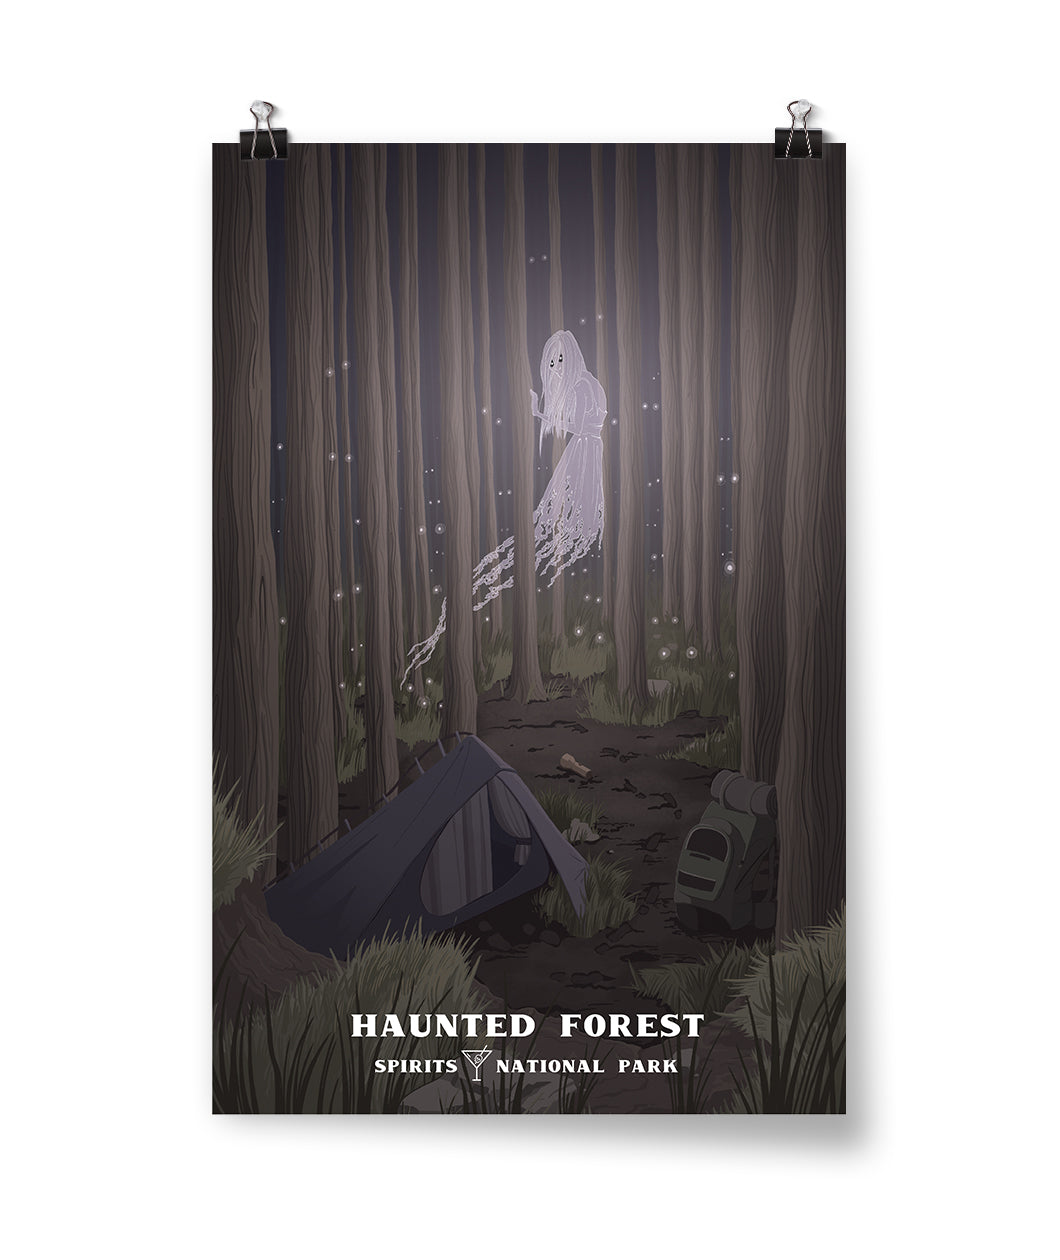 A vector drawing of a dark forest of skinny trees with an abandoned campsite. Yellow fireflies are throughout forest. A ghost of a woman floats in between the trees. “Haunted Forest” is above “Spirits National Park” both in white serif font. An outline drawing of a martini glass is after “Spirits” - from Spirits